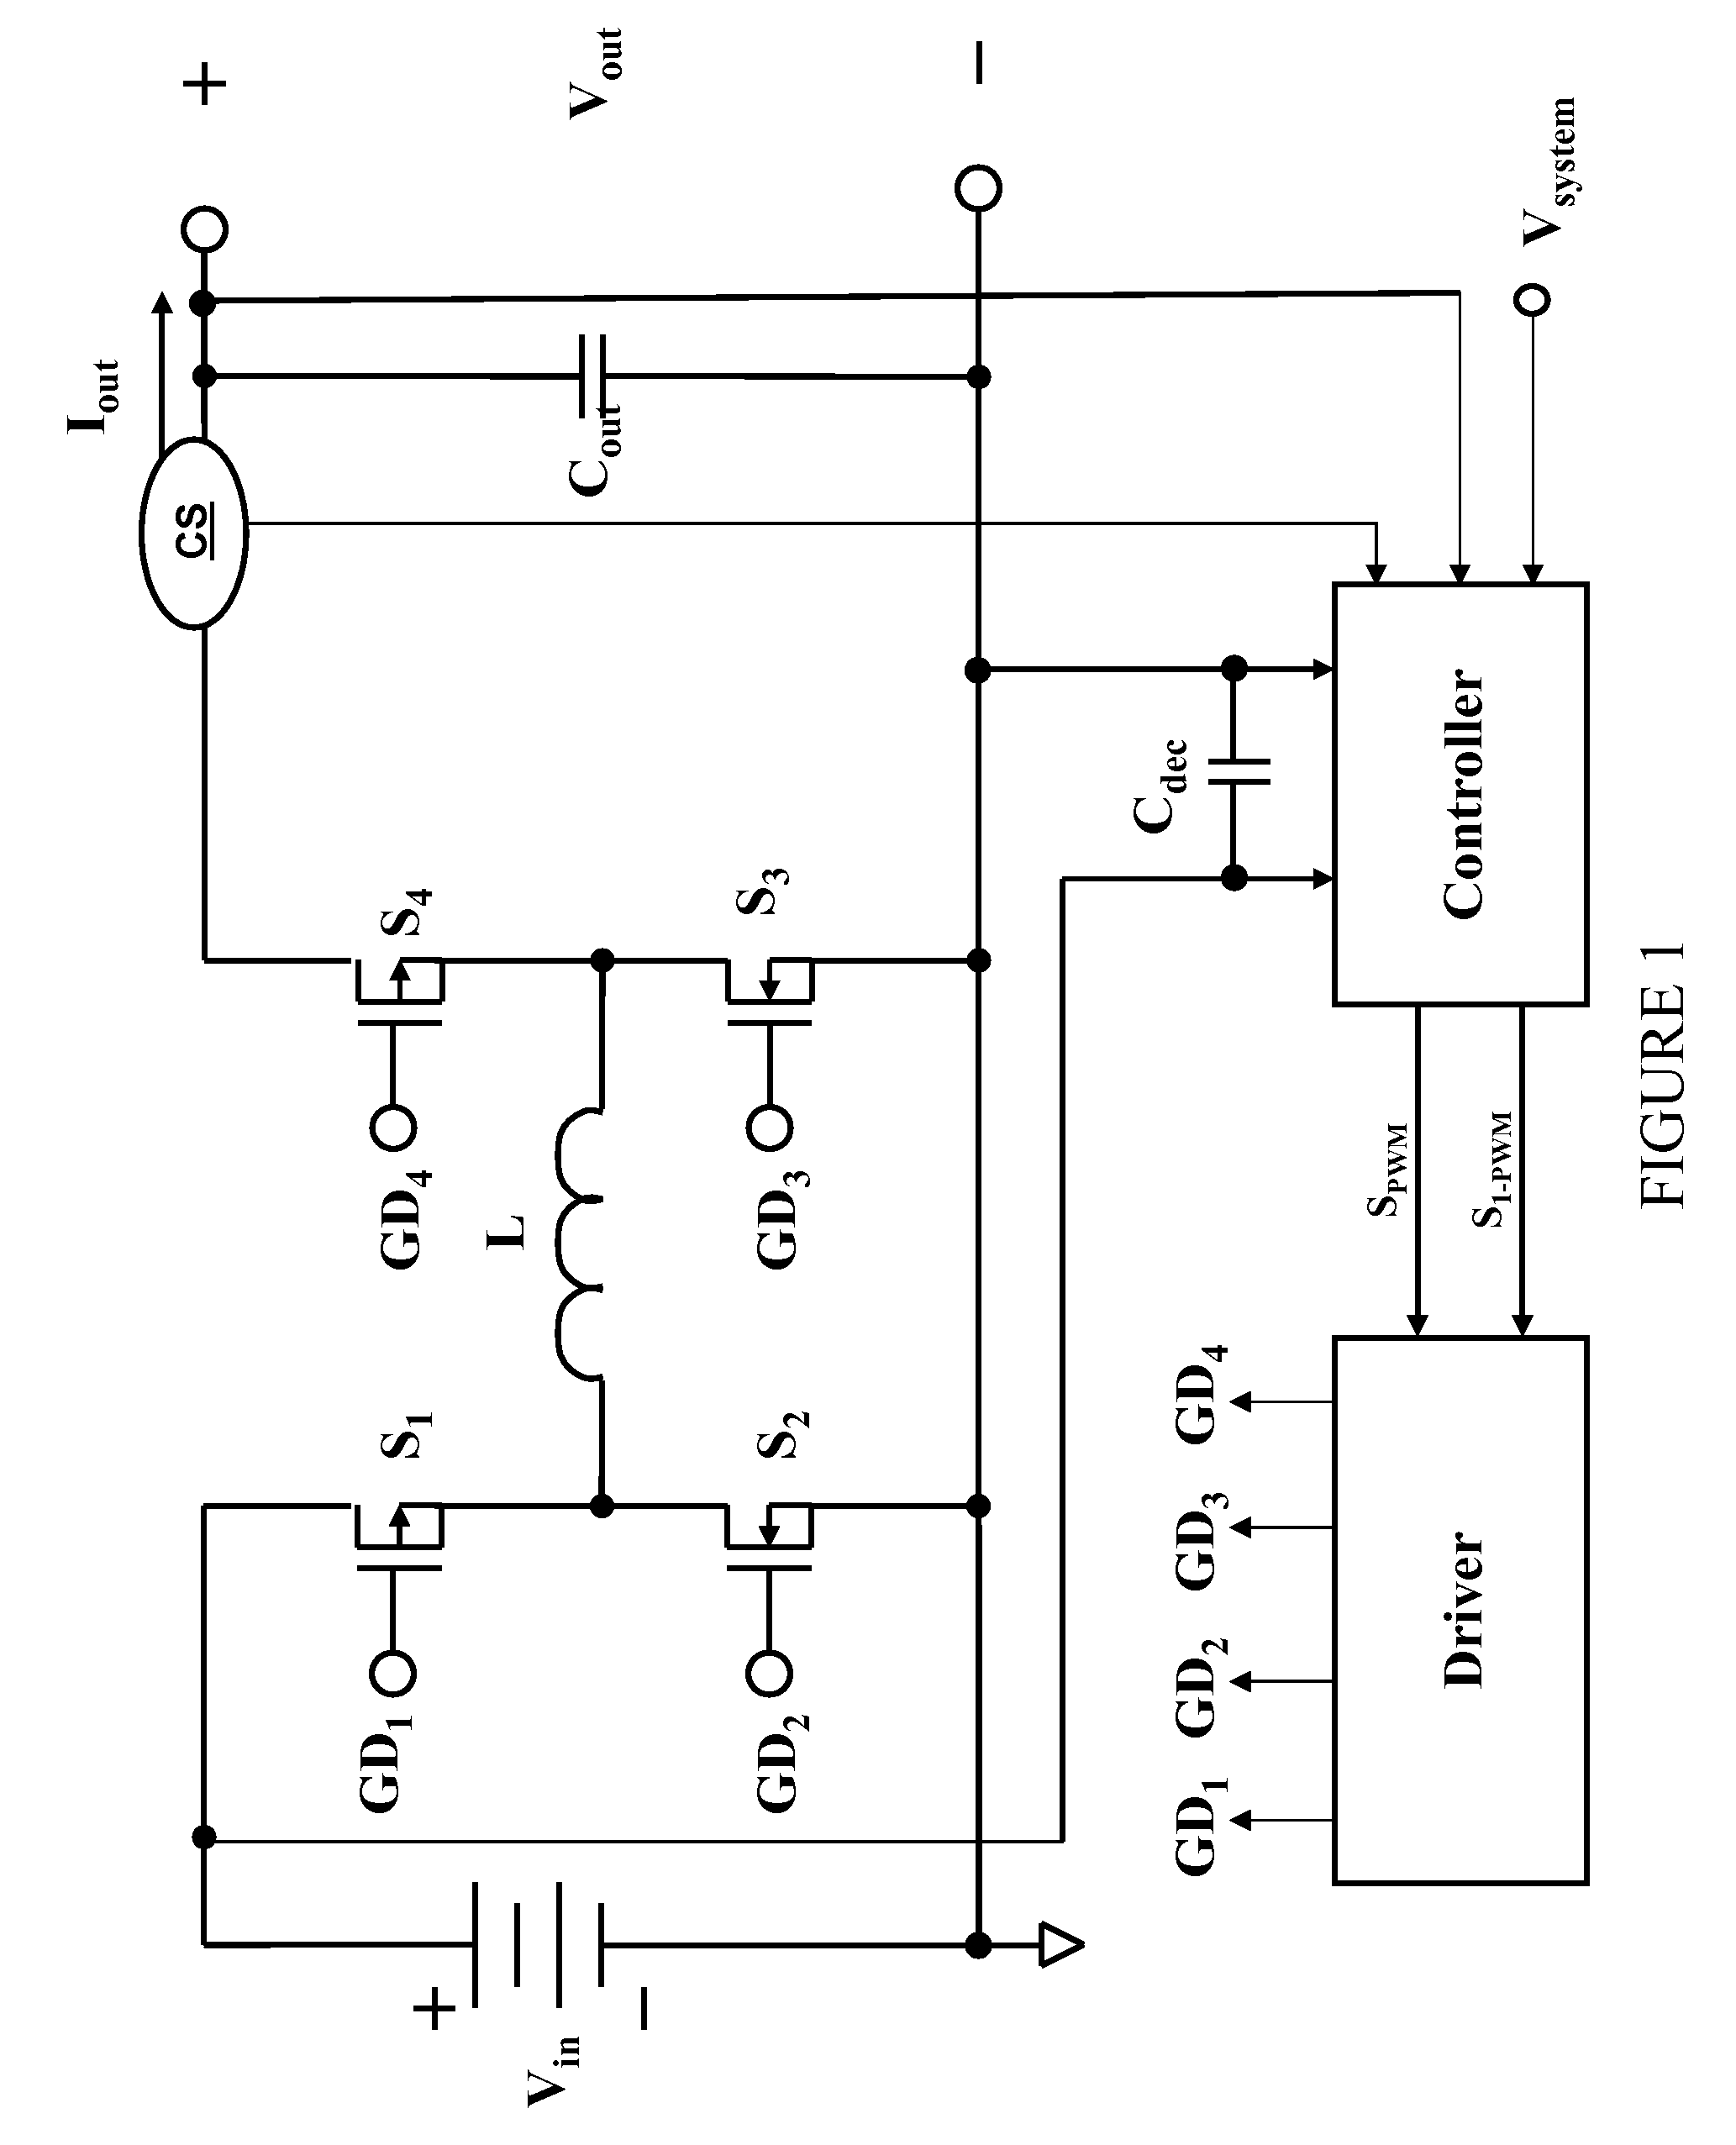 Power Converter with a Dynamically Configurable Controller and Output Filter